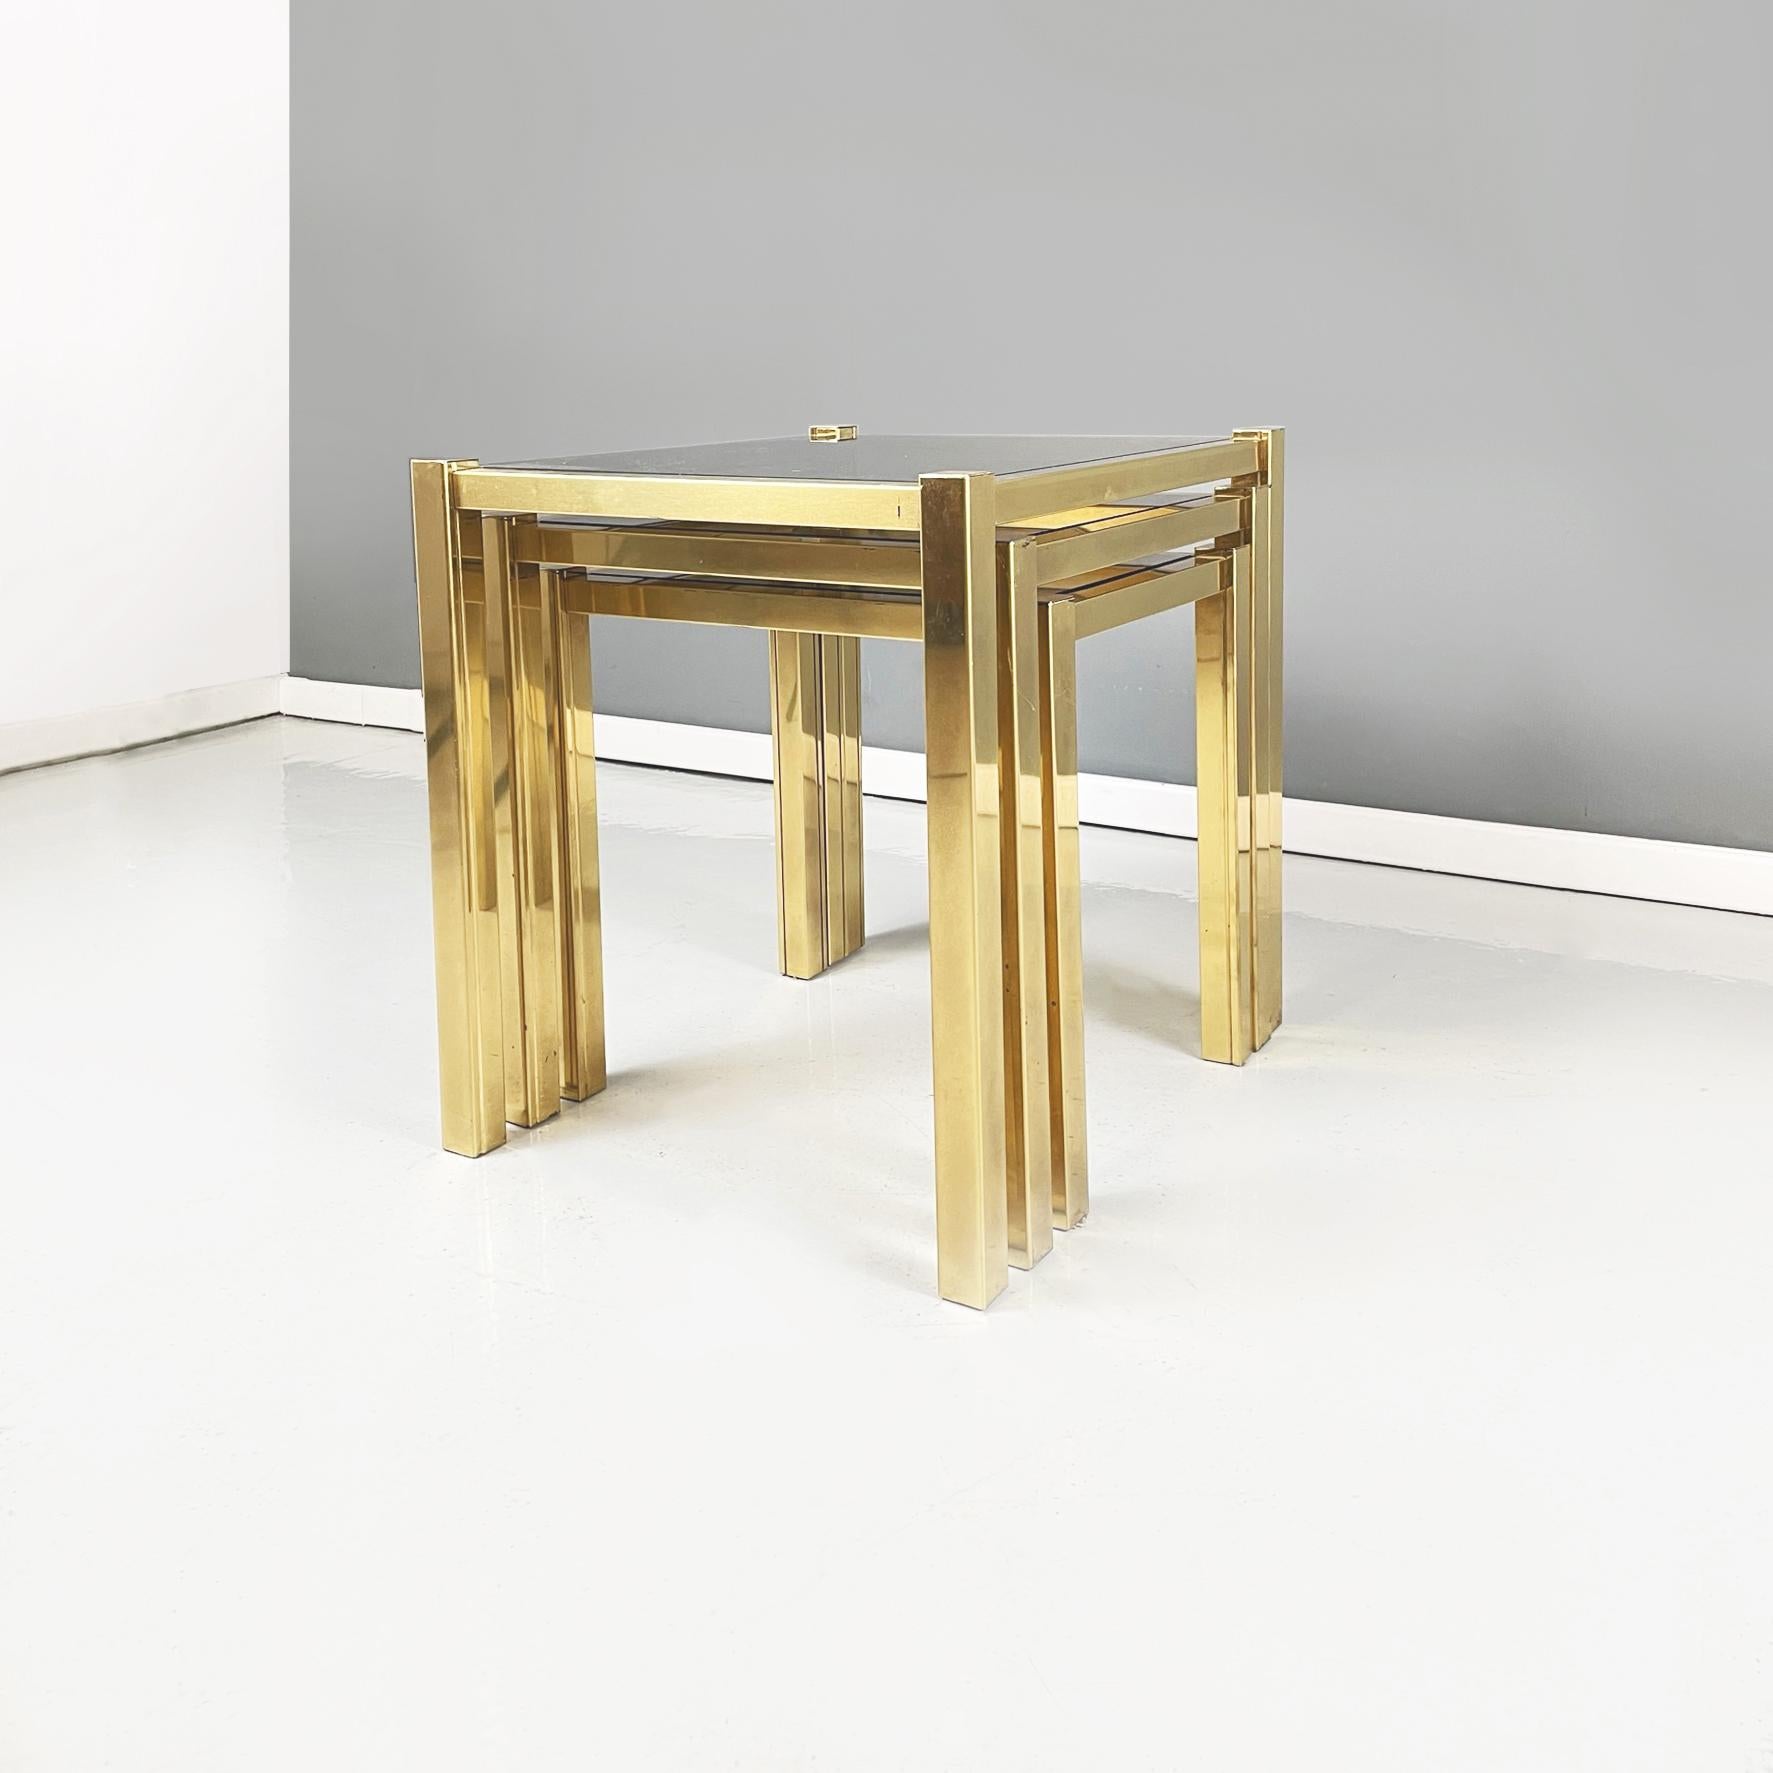 Italian Modern Trio of coffee Tables in Brass and Smoked Glass, 1970s For Sale 1